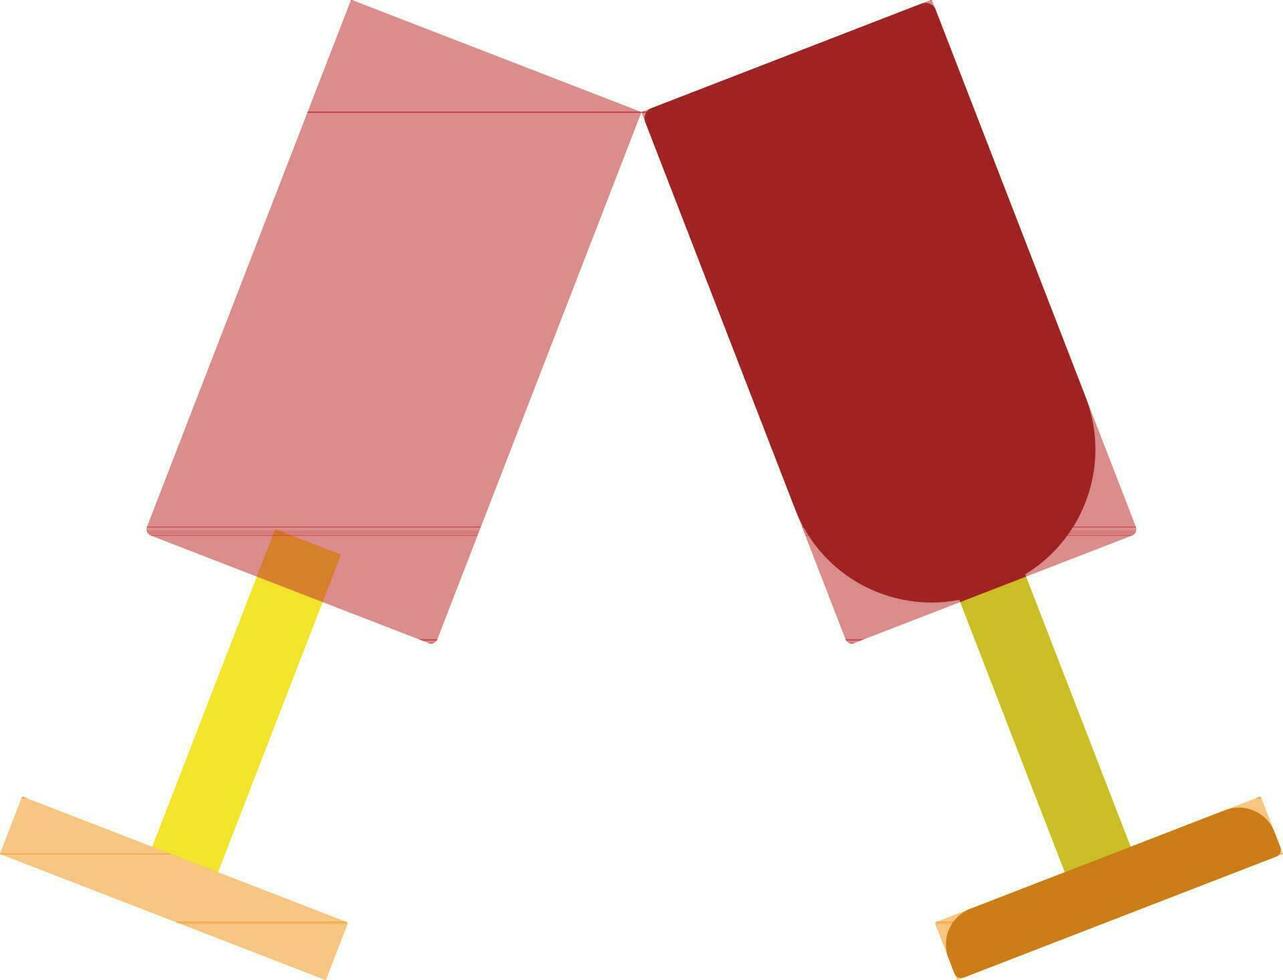 Cocktail glass in red and yellow color. vector